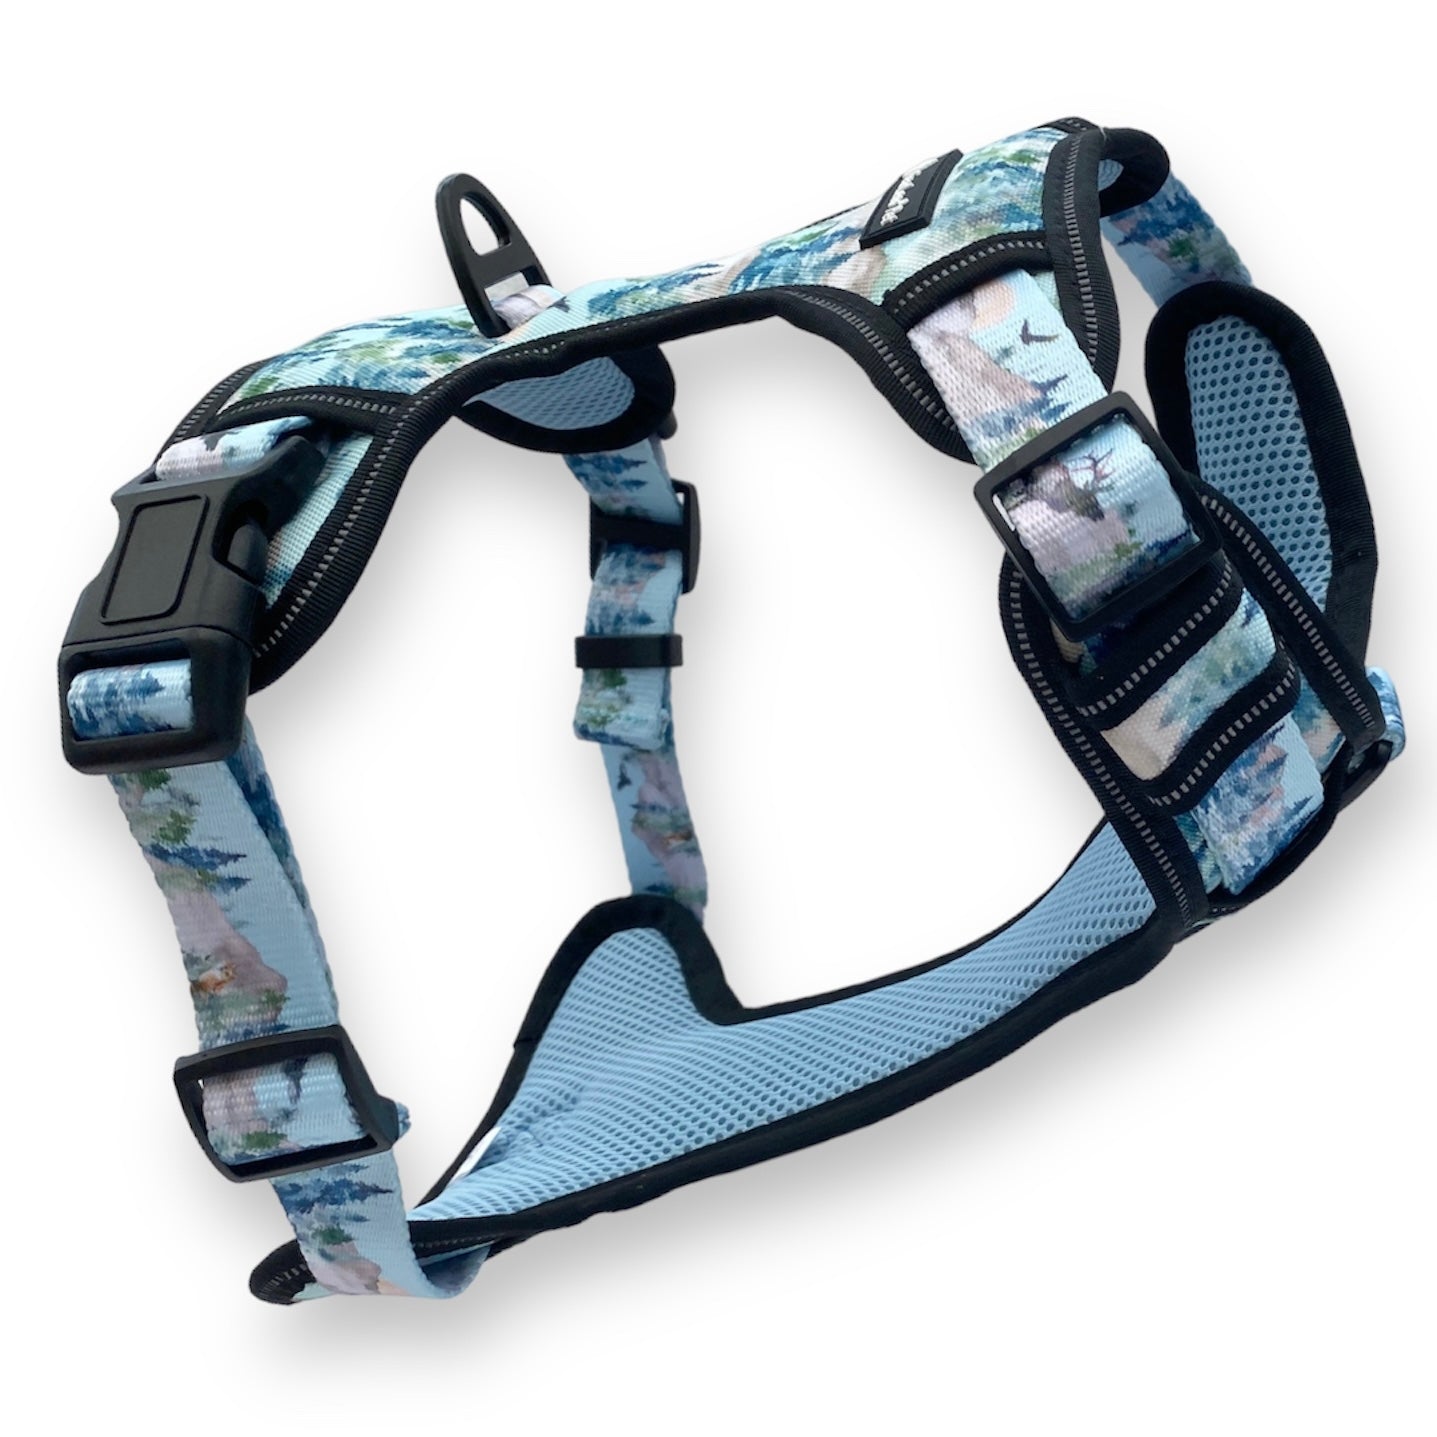 a 3d model of a large no pull dog harness from fearless pet in a trees print